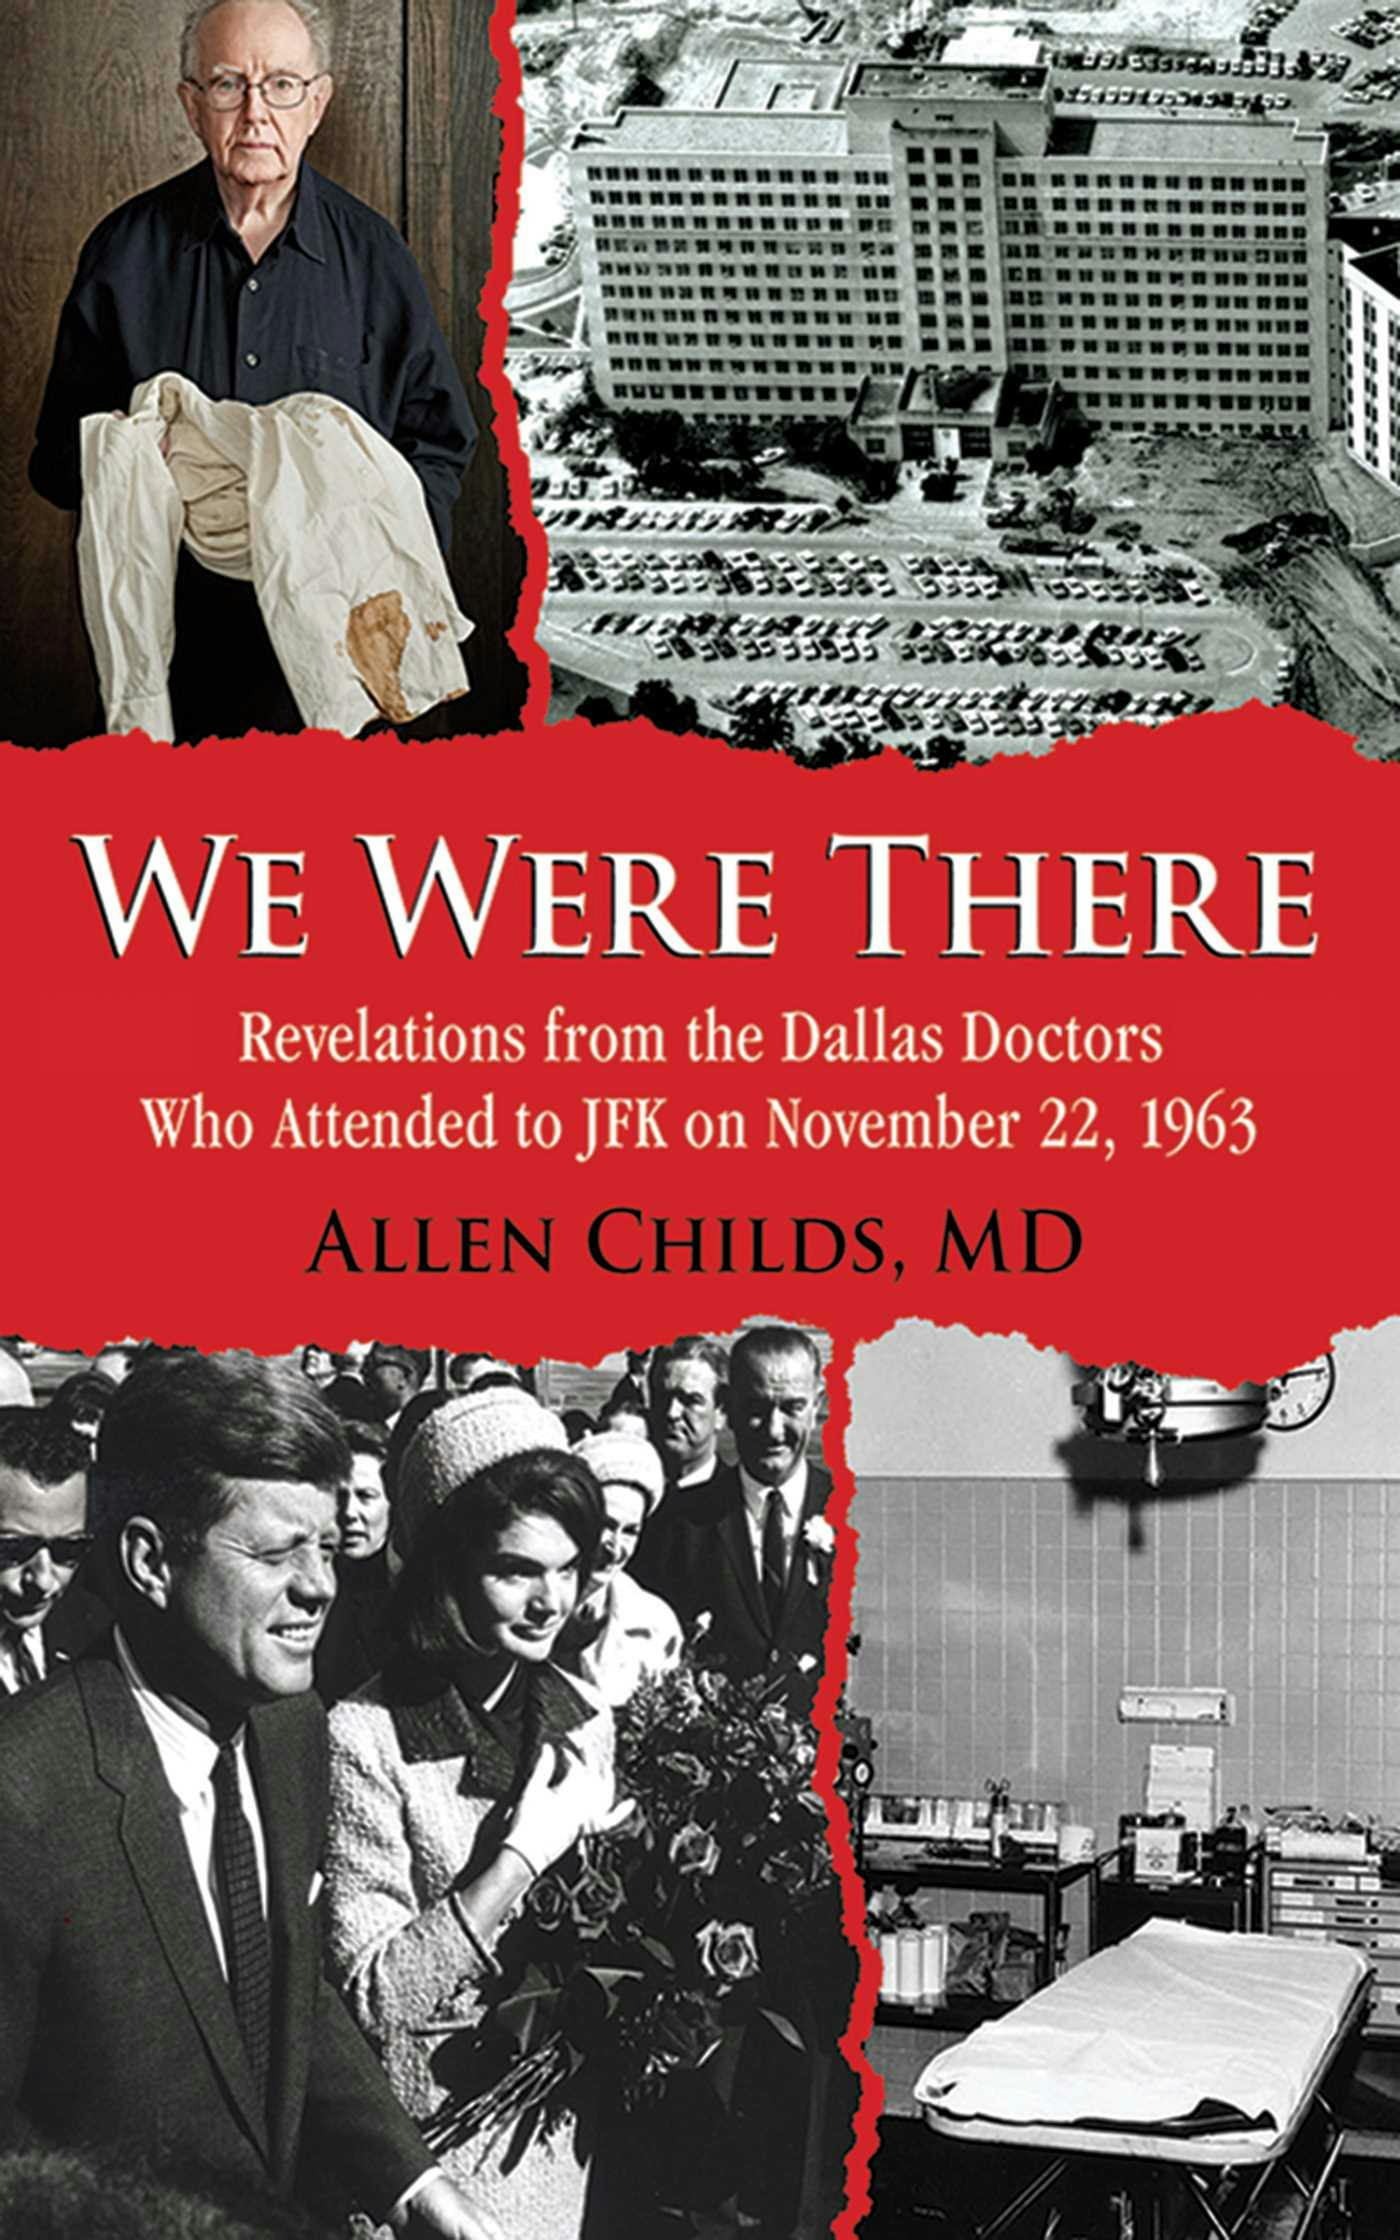 We Were There: Revelations from the Dallas Doctors Who Attended to JFK on November 22, 1963 - Allen Childs